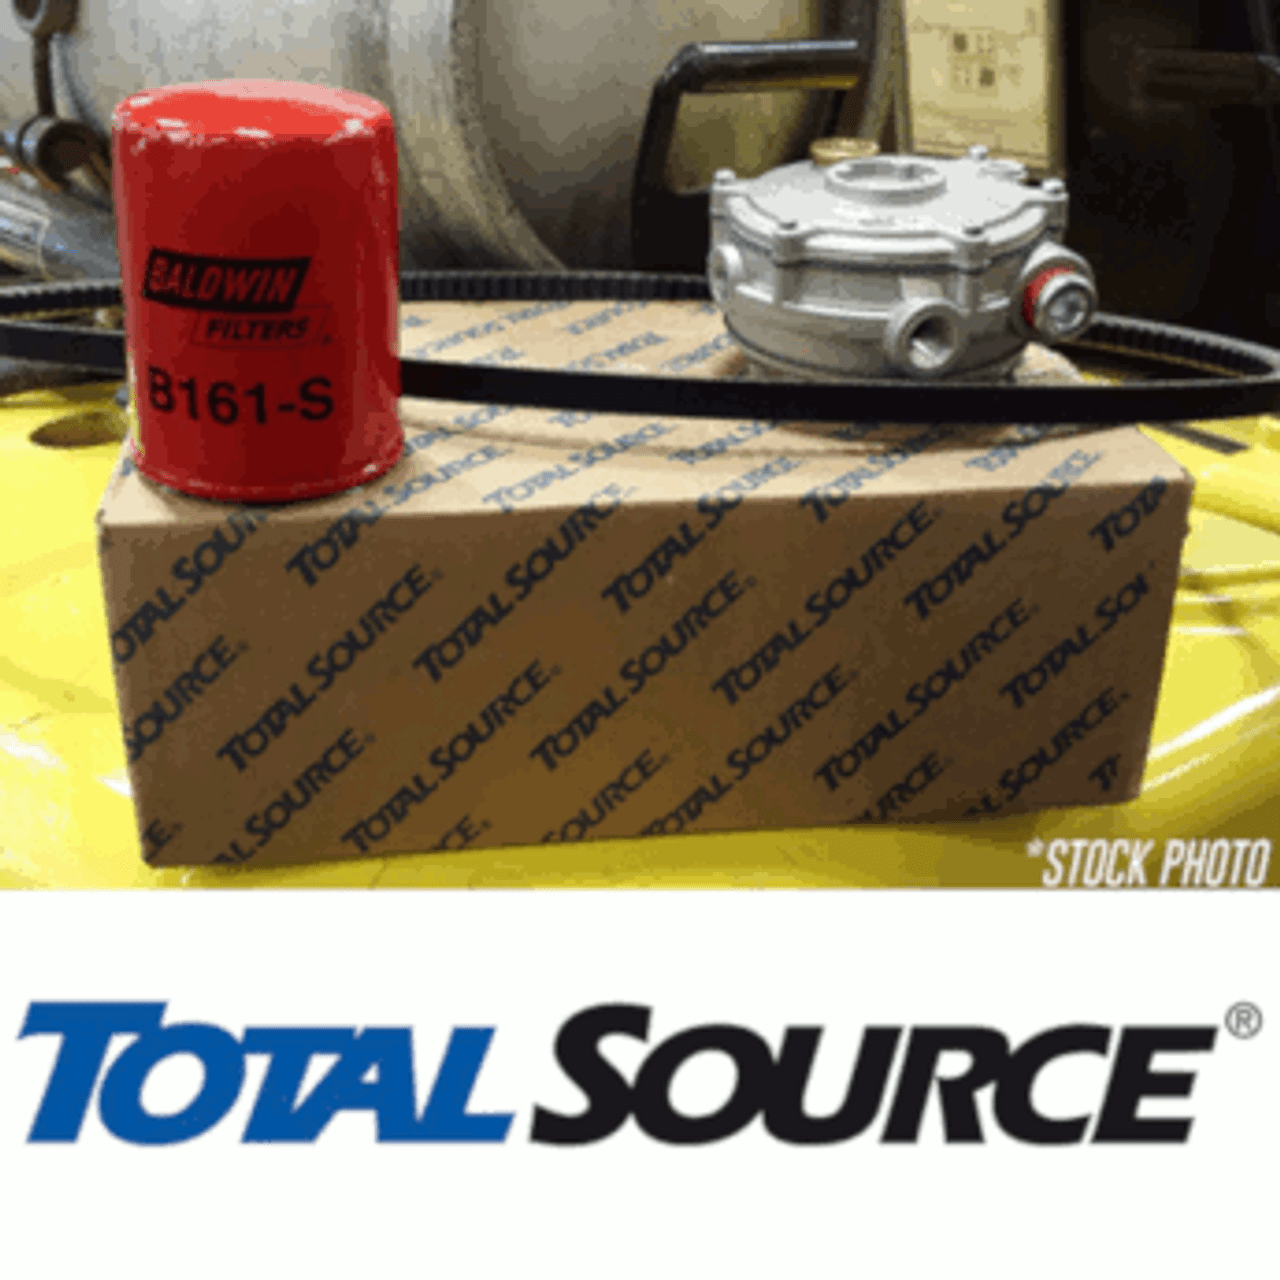 0400244: Gradall CHARGER  TRAILER BATTERY